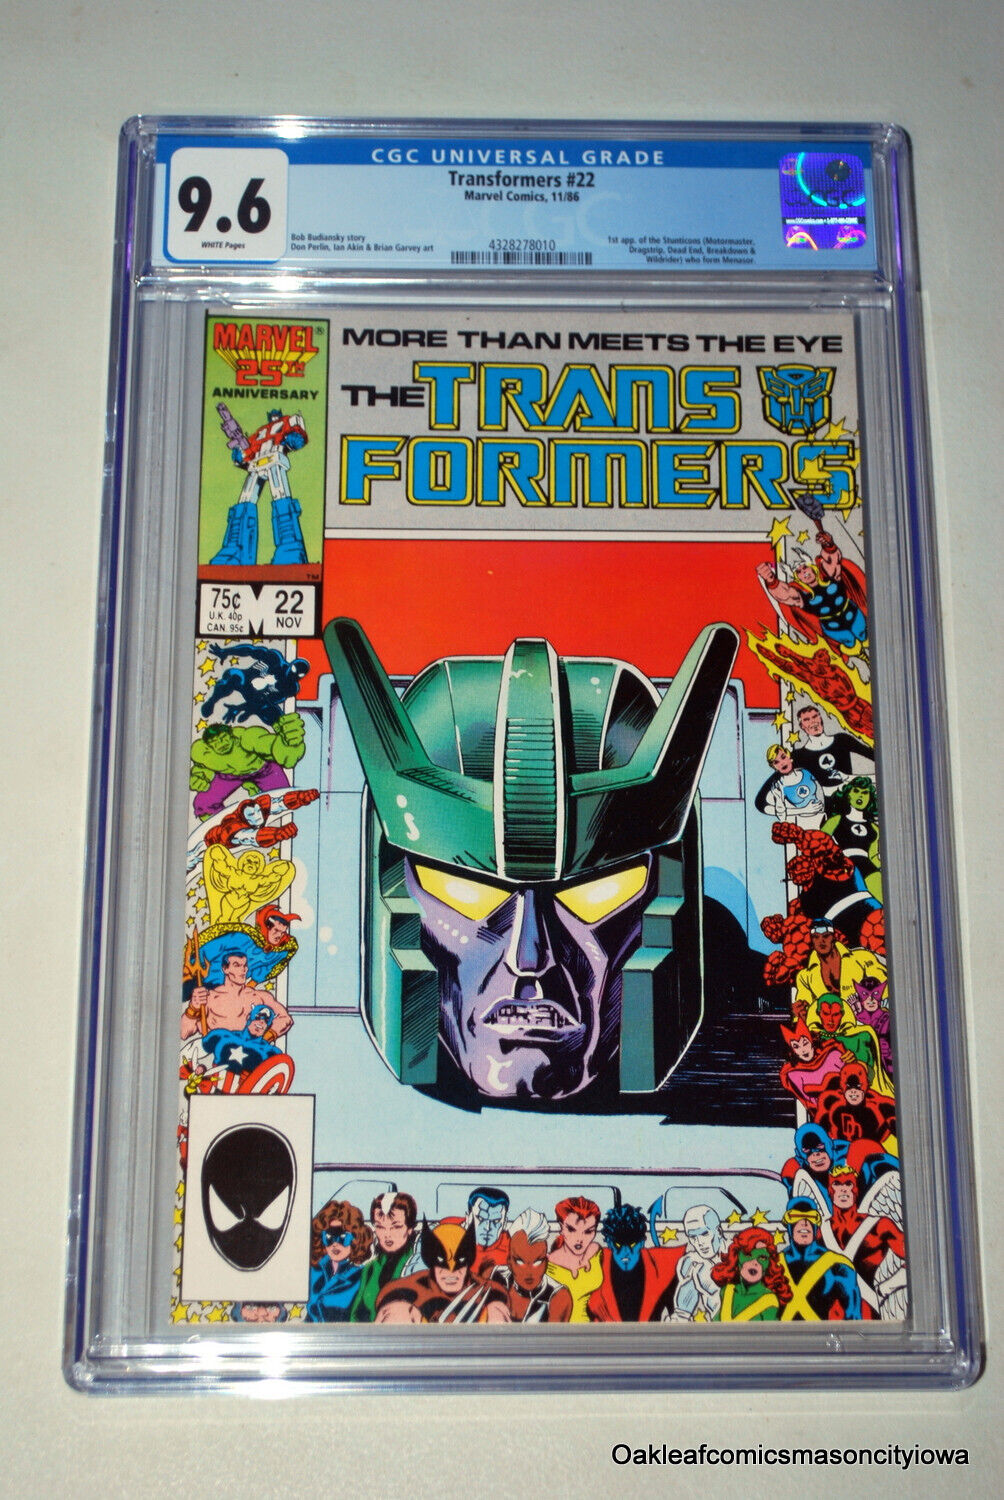 Transformers #22 1986 CGC 9.6 1st app. of the Stunticons who form Menasor. WP